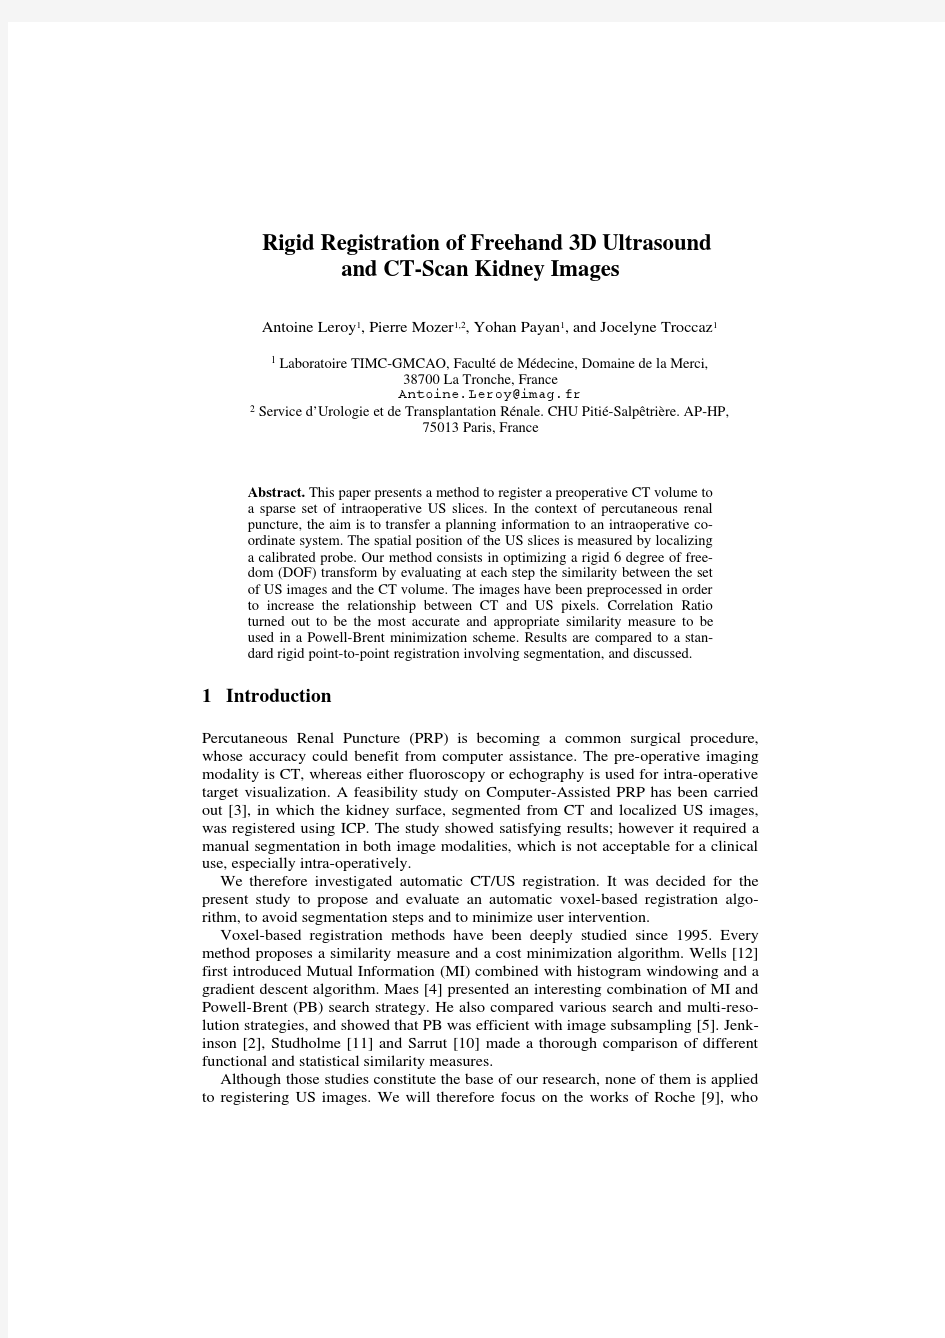 Rigid registration of freehand 3D ultrasound and CT-Scan kidney images